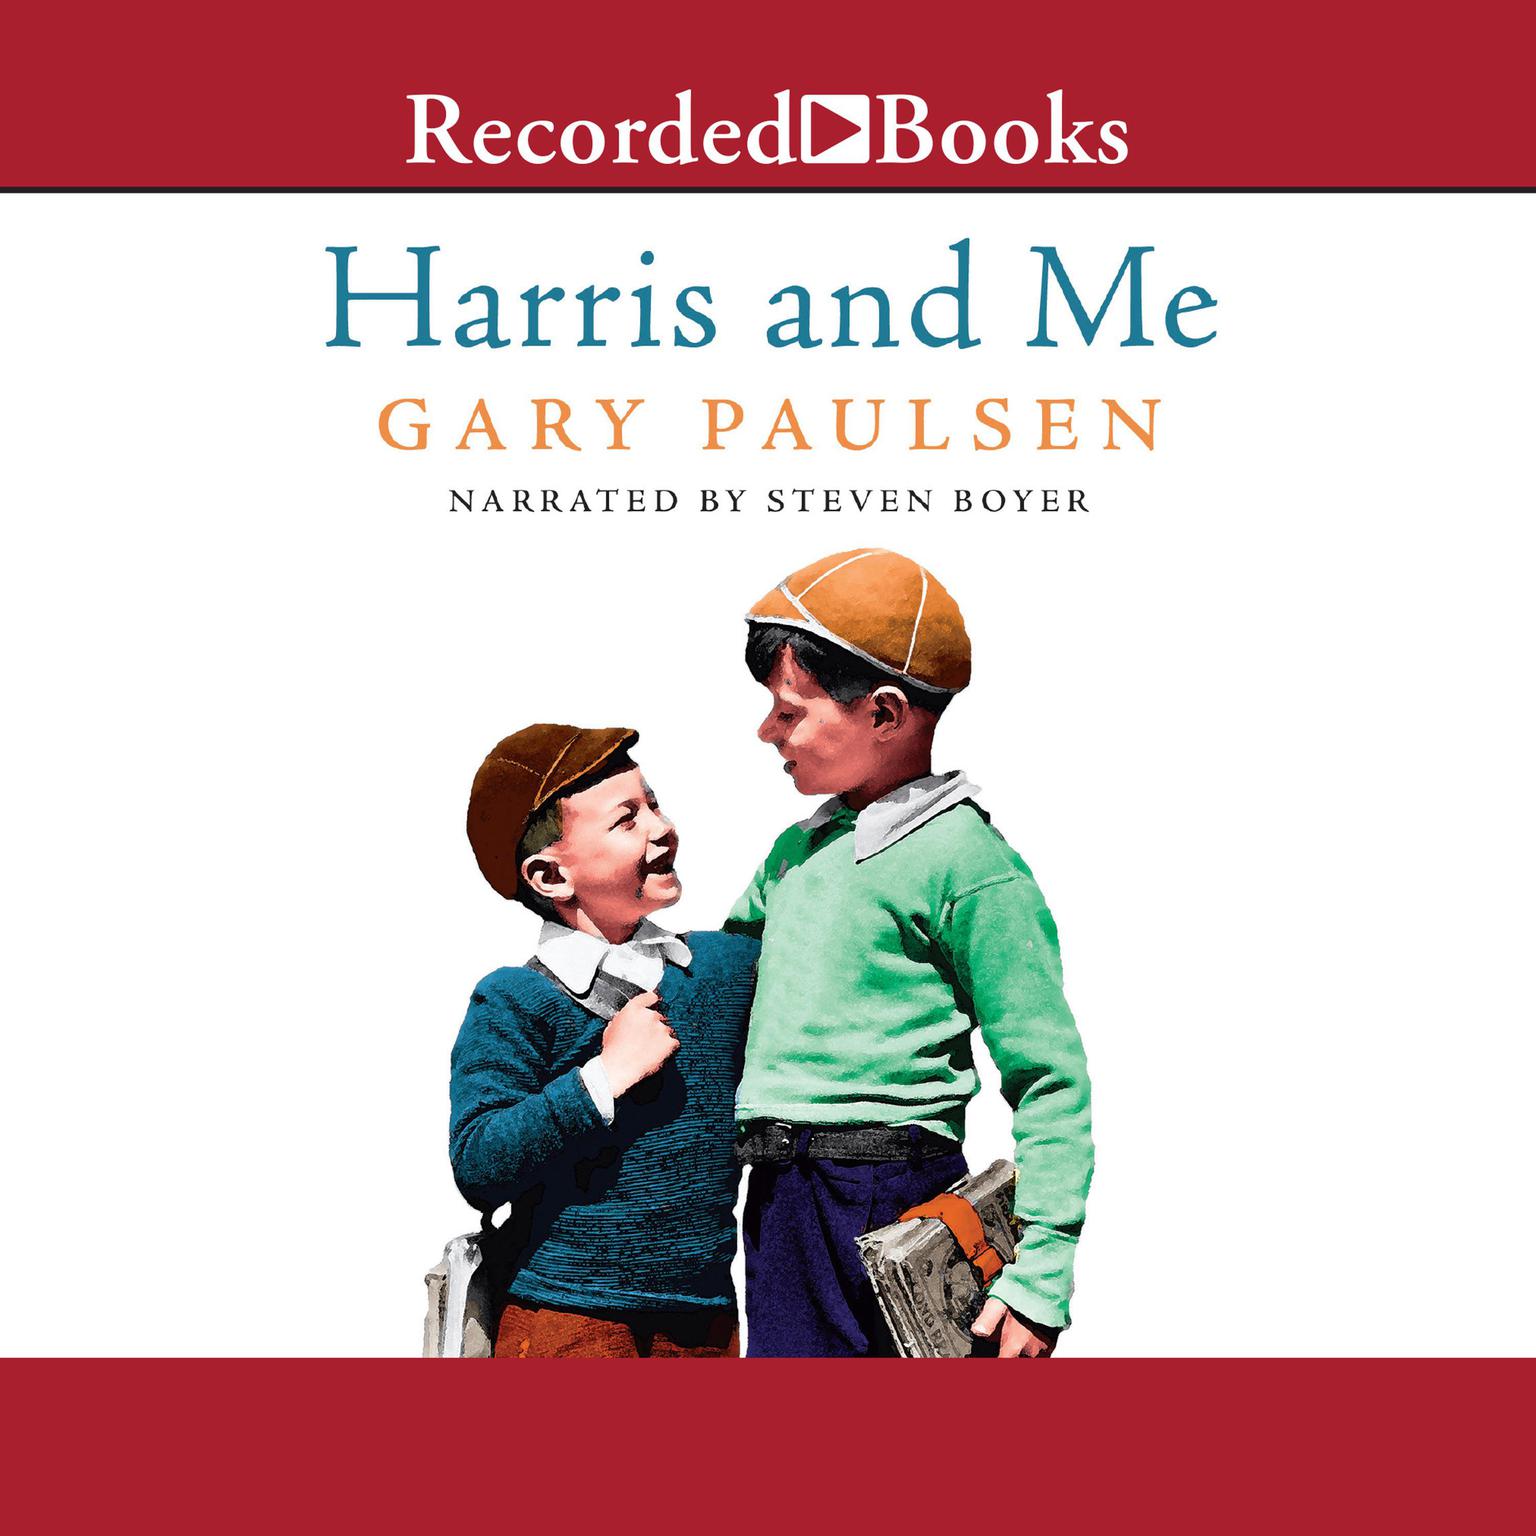 Harris and Me: A Summer Remembered Audiobook, by Gary Paulsen